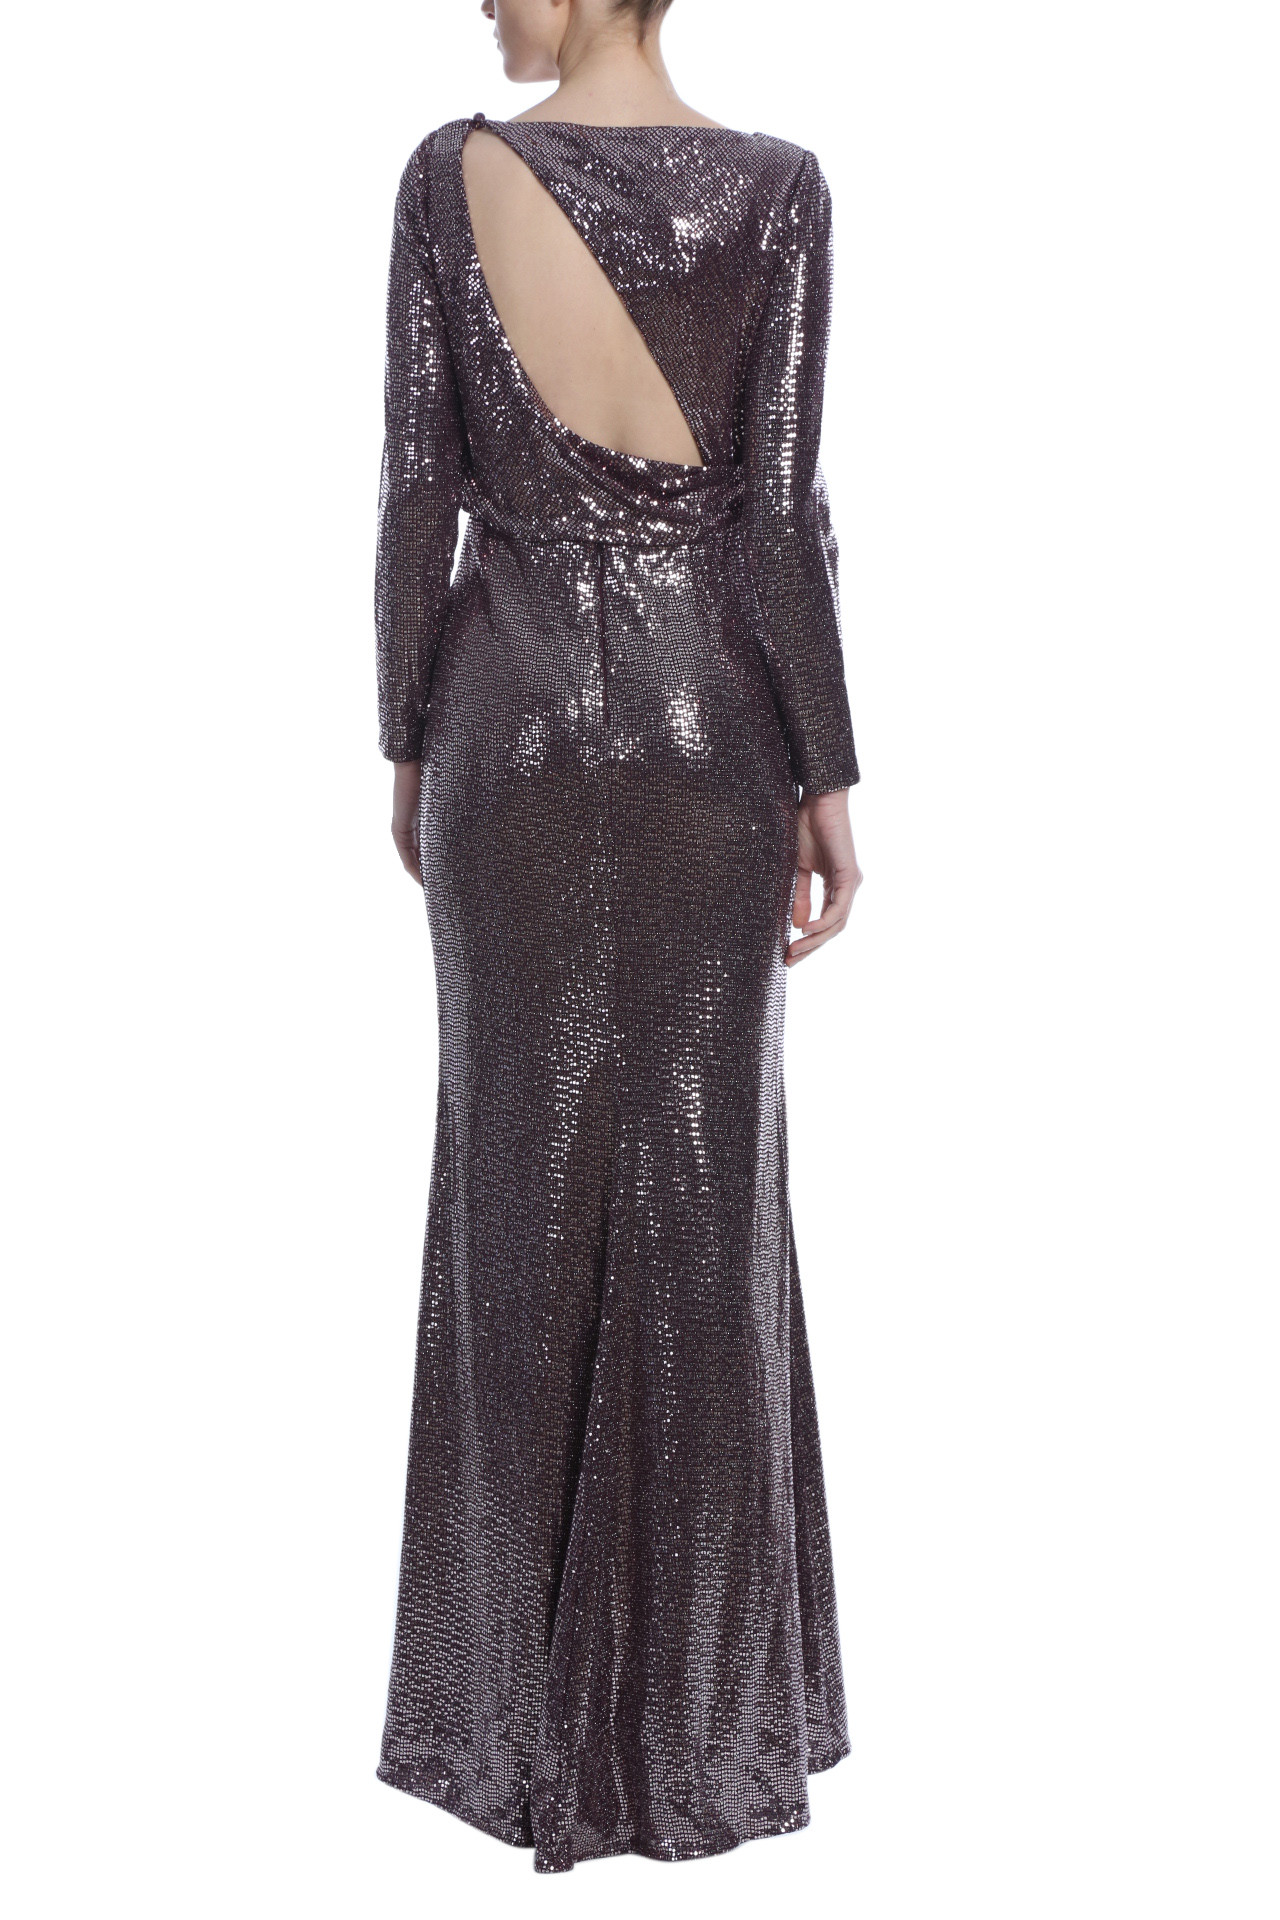 Sequin Asymmetrical Back Cut Out Gown by Badgley Mischka